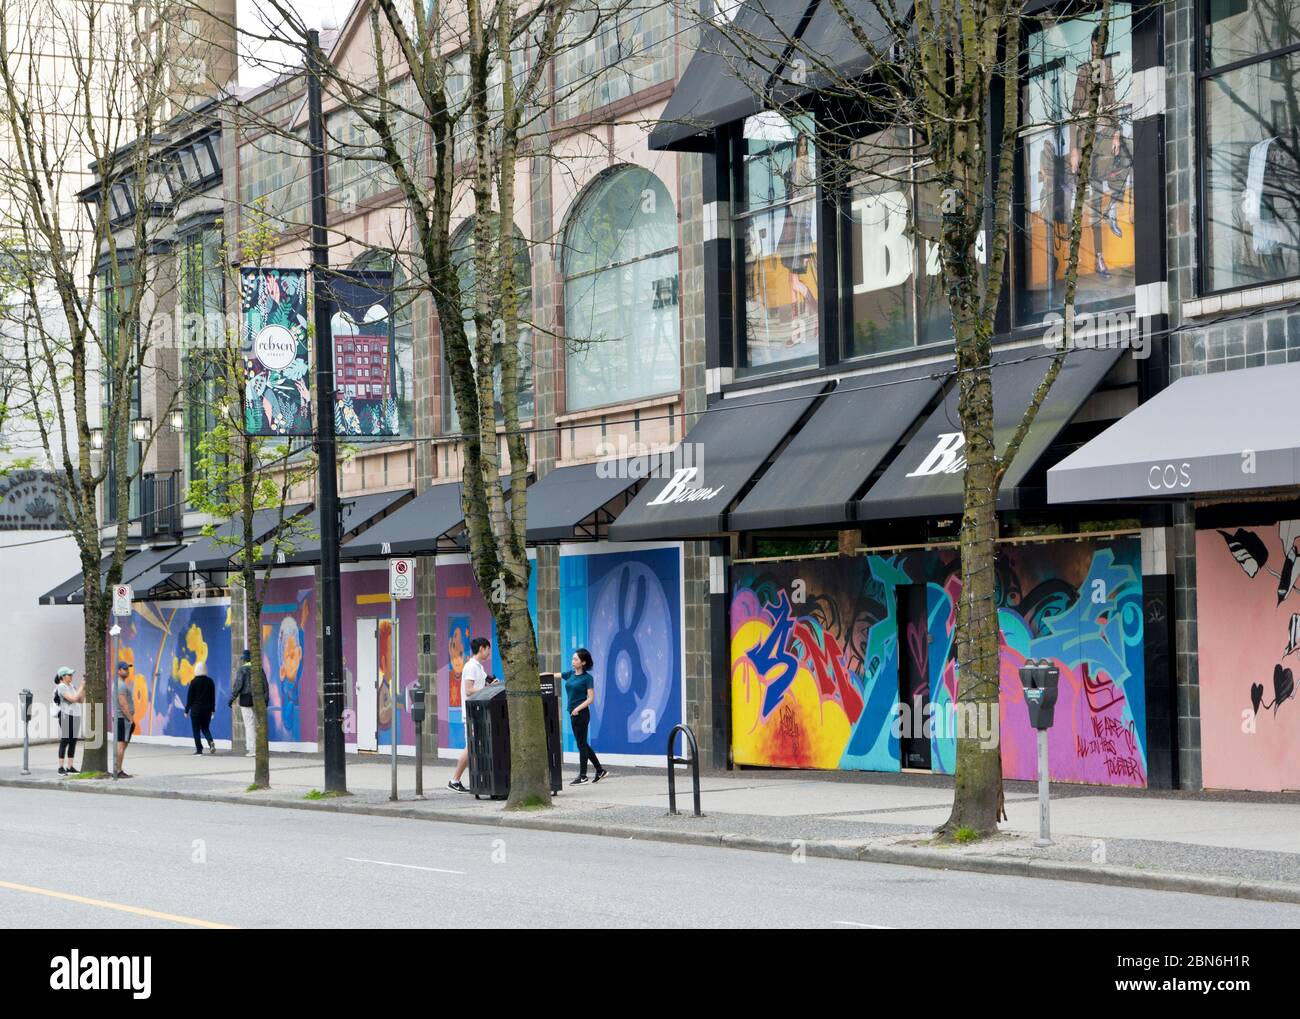 May 9, 2020: Boarded up shops on Robson Street in Vancouver, covered with inspiring murals during the Covid 19 pandemic. Stock Photo